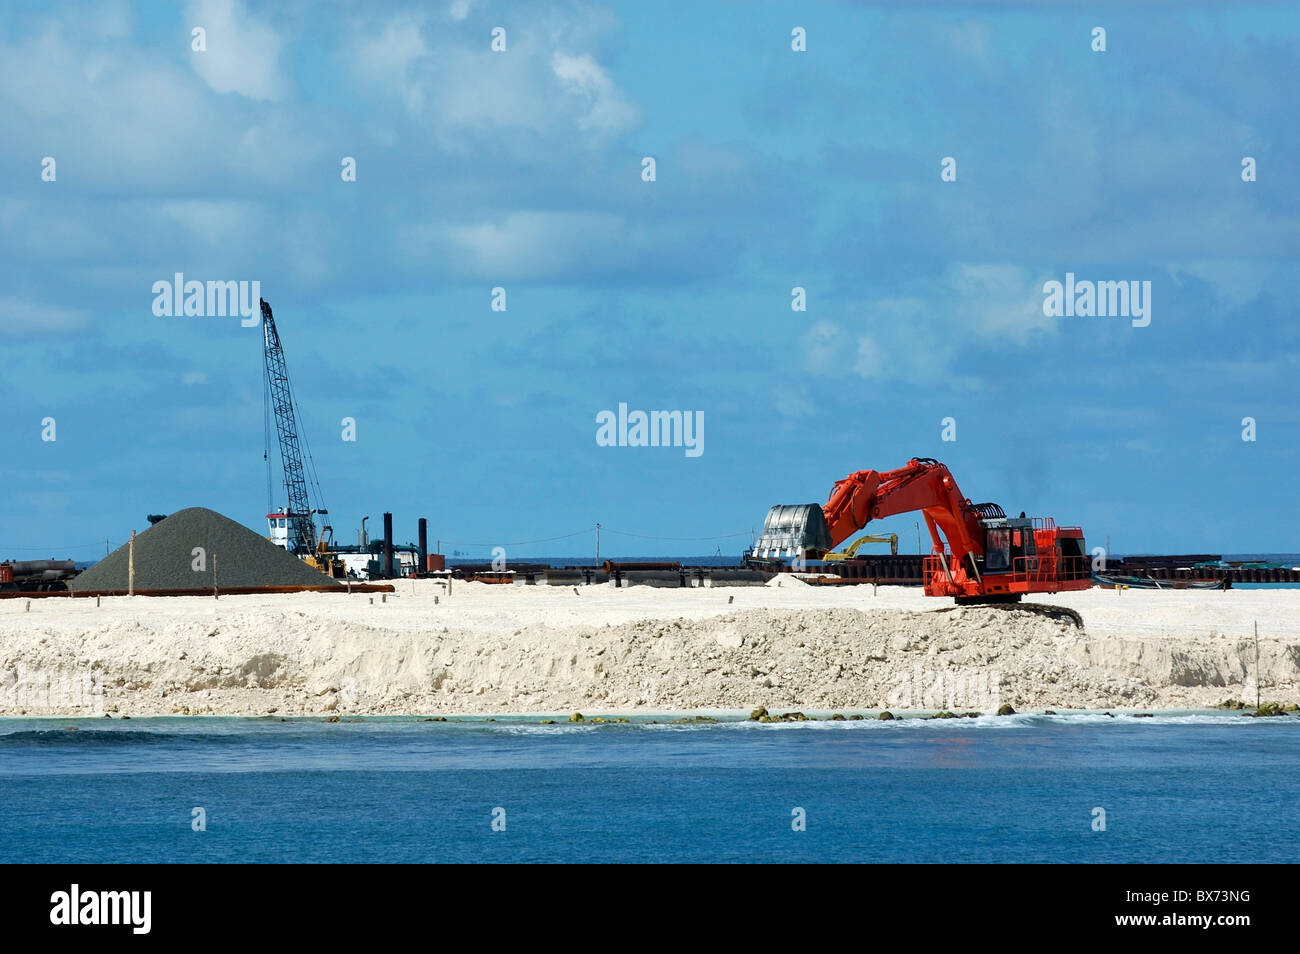 Maldives ari atoll crane at work on the construction of a new airport on an island Stock Photo